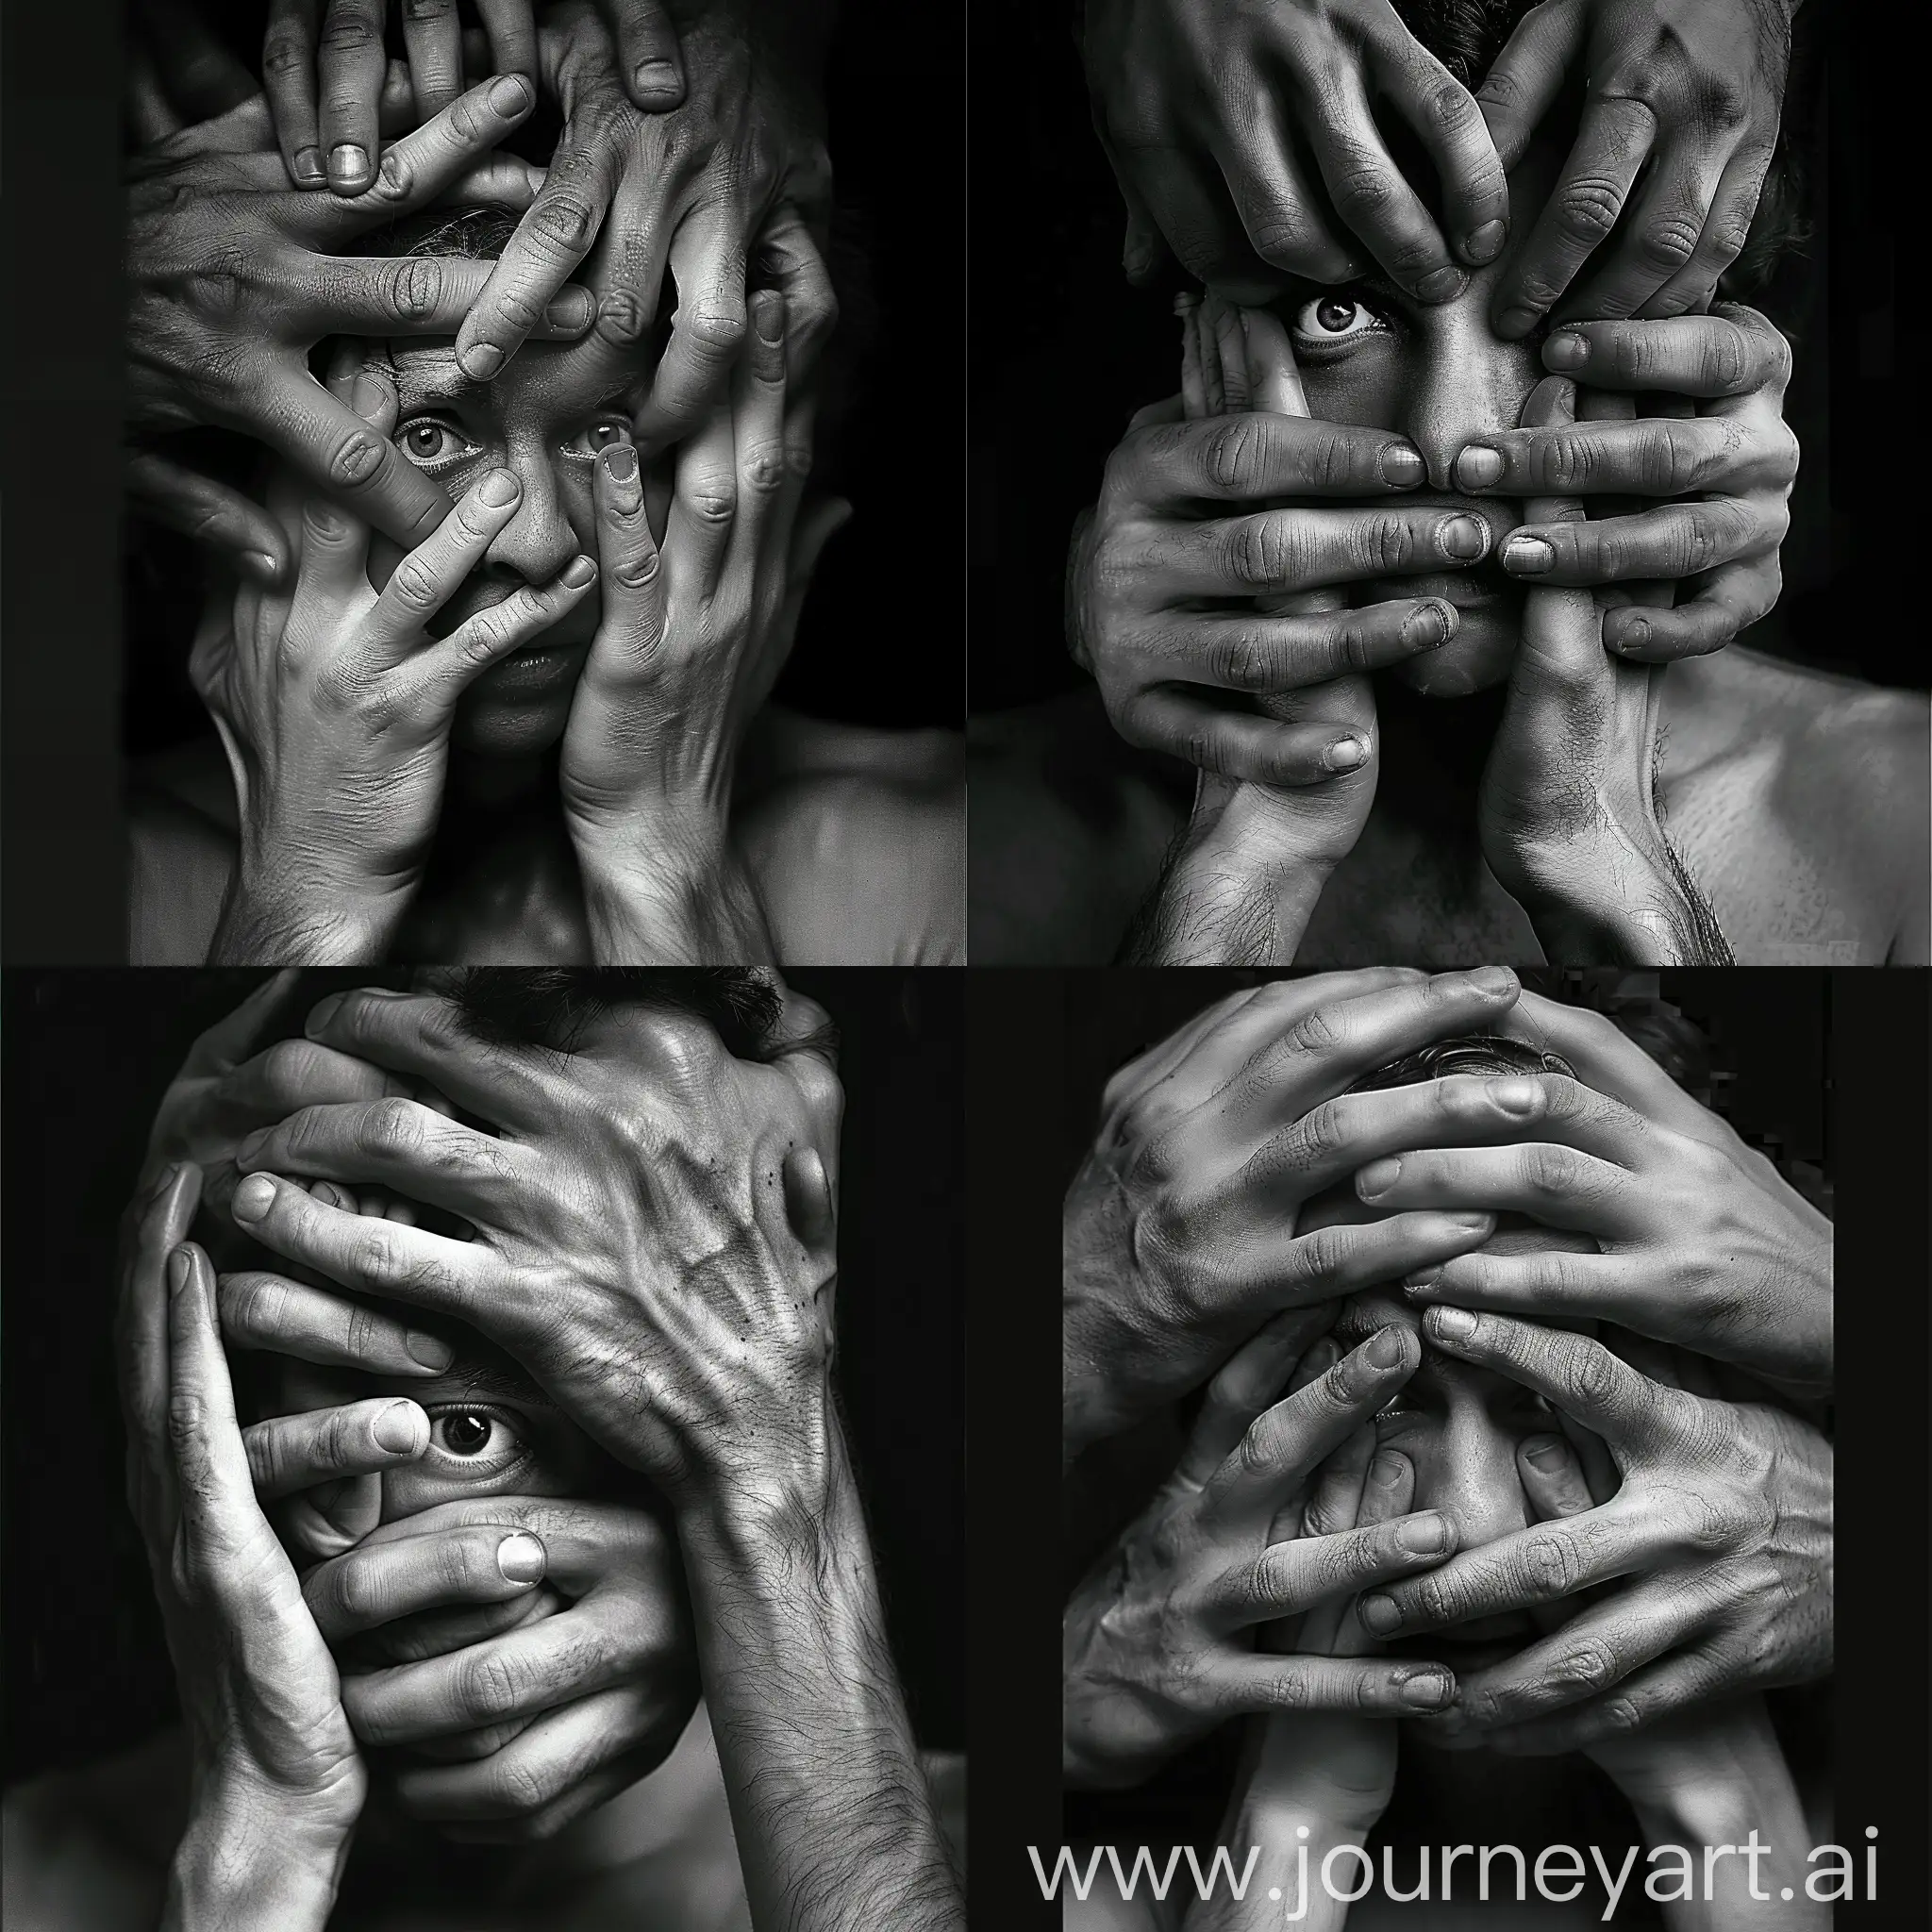 The photo depicts a surreal and striking image of a person surrounded by multiple hands that appear to cover their face and head. The hands are positioned in such a way that they obscure most of the person's features, leaving only one eye visible through a small gap. The image is in black and white, which enhances its dramatic and intense atmosphere. The composition suggests themes of entrapment, suppression, and possibly fear or anxiety, as the multitude of hands creates a sense of confinement and lack of freedom.